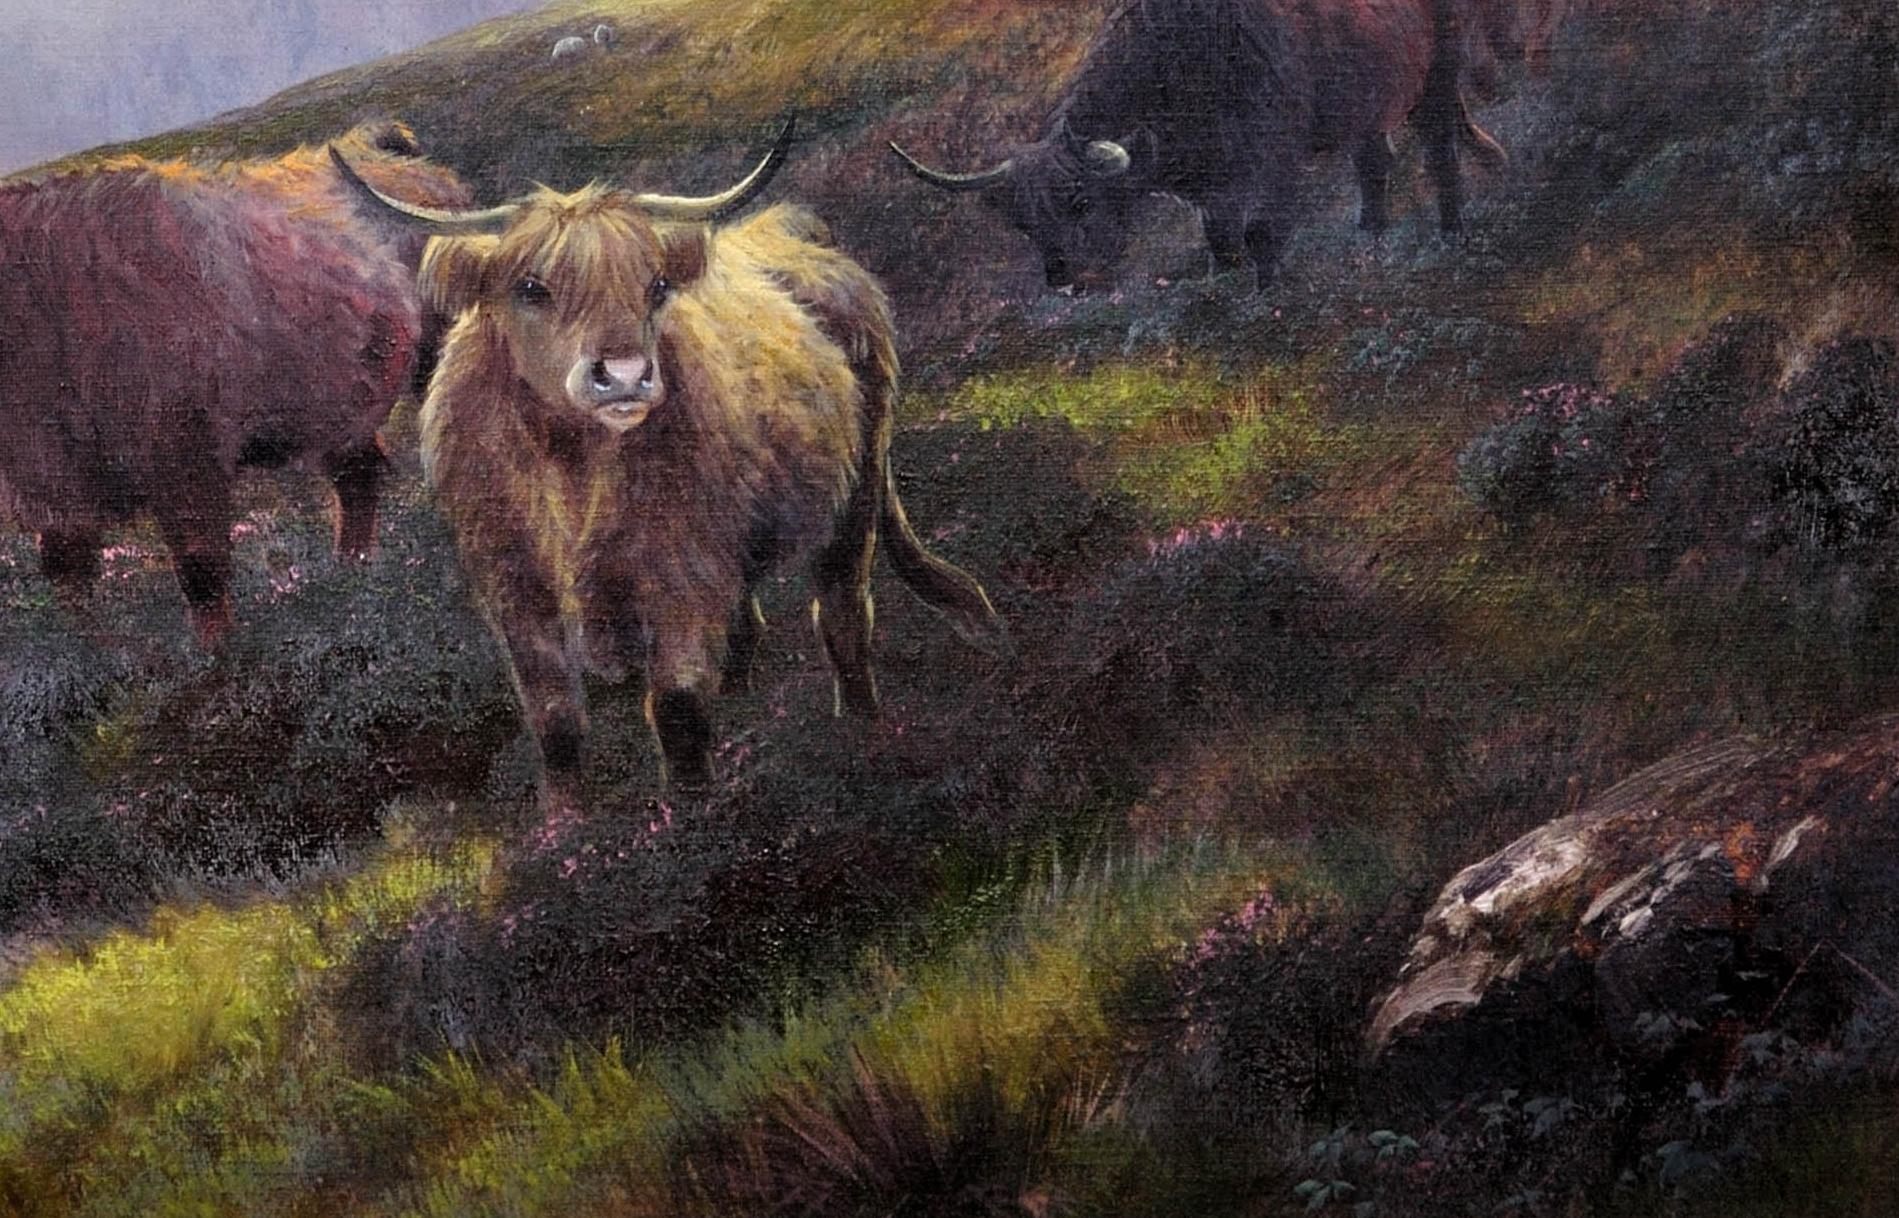 Moorland Rovers, Perthshire, North Britain. Scotland. Highland Cattle. Cows. 12